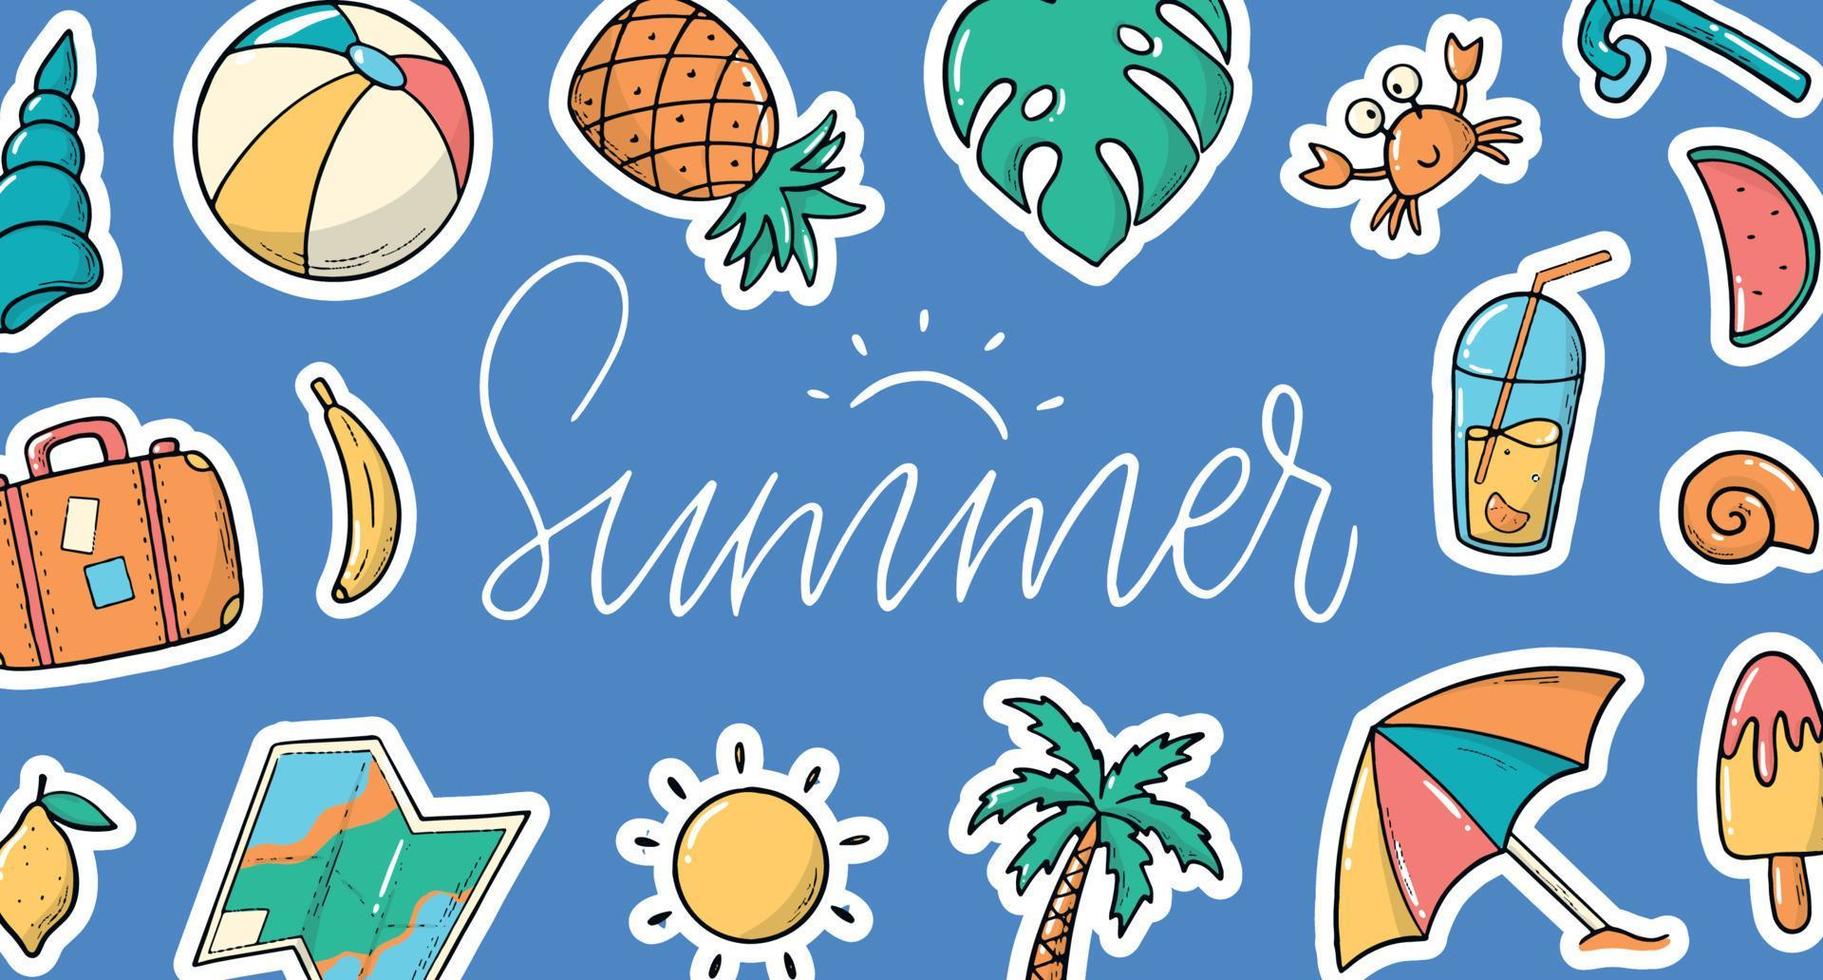 summer horizontal banner decorated with lettering quote and doodles on blue background. Good for greeting cards, prints, invitations, promotions, labels, etc. EPS 10 vector